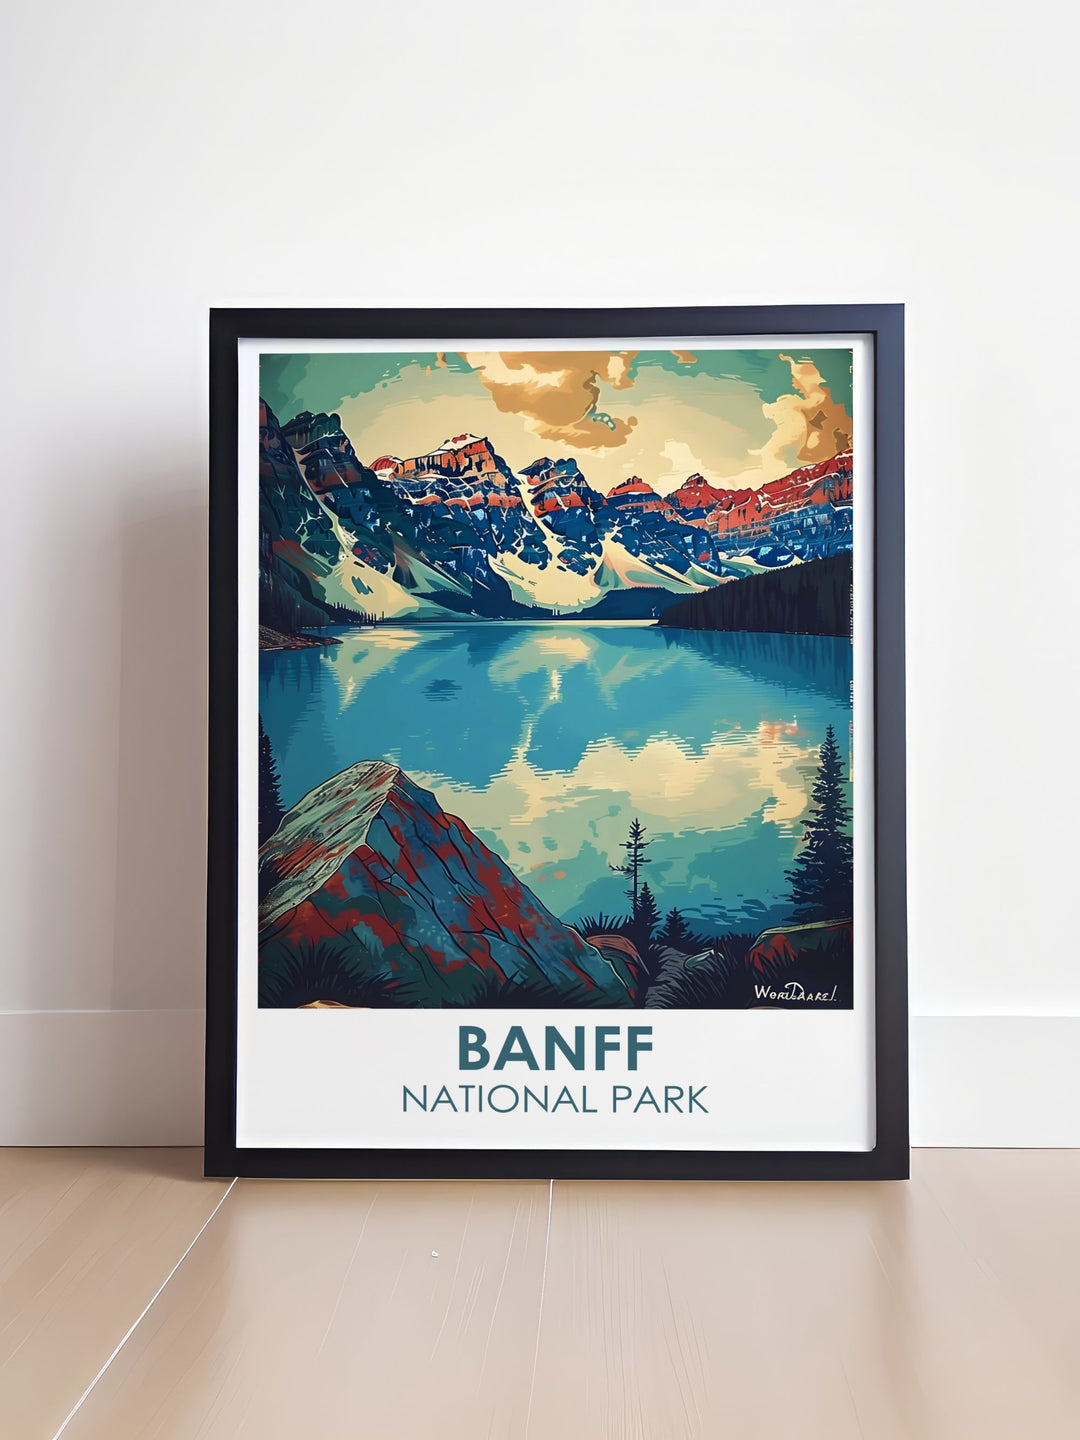 Banff National Park modern wall decor showcasing vibrant autumn colors against majestic mountain backdrops, ideal for enhancing any living space.